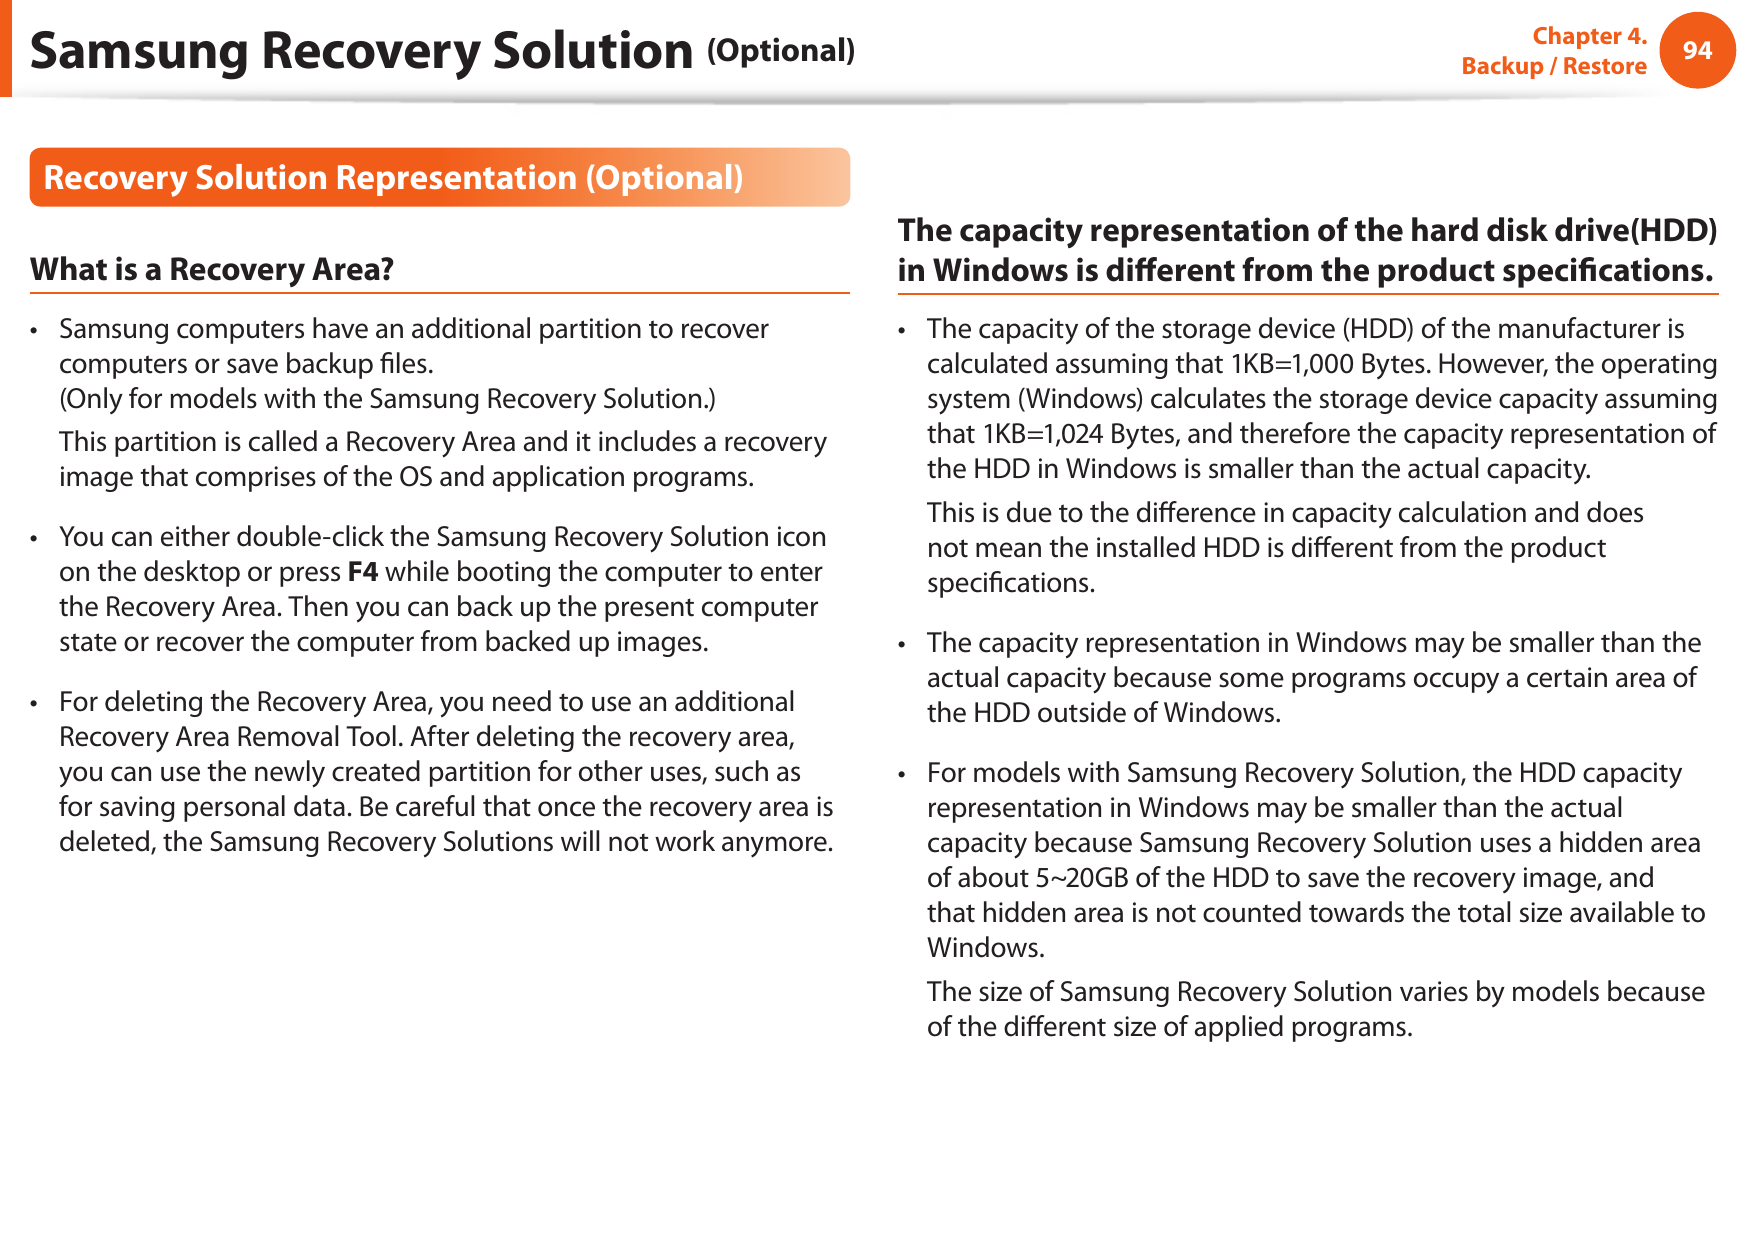 94Chapter 4.   Backup / RestoreRecovery Solution Representation (Optional)What is a Recovery Area?Samsung computers have an additional partition to recover • computers or save backup les. (Only for models with the Samsung Recovery Solution.)  This partition is called a Recovery Area and it includes a recovery image that comprises of the OS and application programs.You can either double-click the Samsung Recovery Solution icon • on the desktop or press F4 while booting the computer to enter the Recovery Area. Then you can back up the present computer state or recover the computer from backed up images.For deleting the Recovery Area, you need to use an additional • Recovery Area Removal Tool. After deleting the recovery area, you can use the newly created partition for other uses, such as for saving personal data. Be careful that once the recovery area is deleted, the Samsung Recovery Solutions will not work anymore.The capacity representation of the hard disk drive(HDD) in Windows is dierent from the product specications.The capacity of the storage device (HDD) of the manufacturer is • calculated assuming that 1KB=1,000 Bytes. However, the operating system (Windows) calculates the storage device capacity assuming that 1KB=1,024 Bytes, and therefore the capacity representation of the HDD in Windows is smaller than the actual capacity.  This is due to the dierence in capacity calculation and does not mean the installed HDD is dierent from the product specications.The capacity representation in Windows may be smaller than the • actual capacity because some programs occupy a certain area of the HDD outside of Windows.For models with Samsung Recovery Solution, the HDD capacity • representation in Windows may be smaller than the actual capacity because Samsung Recovery Solution uses a hidden area of about 5~20GB of the HDD to save the recovery image, and that hidden area is not counted towards the total size available to Windows.  The size of Samsung Recovery Solution varies by models because of the dierent size of applied programs.Samsung Recovery Solution (Optional)